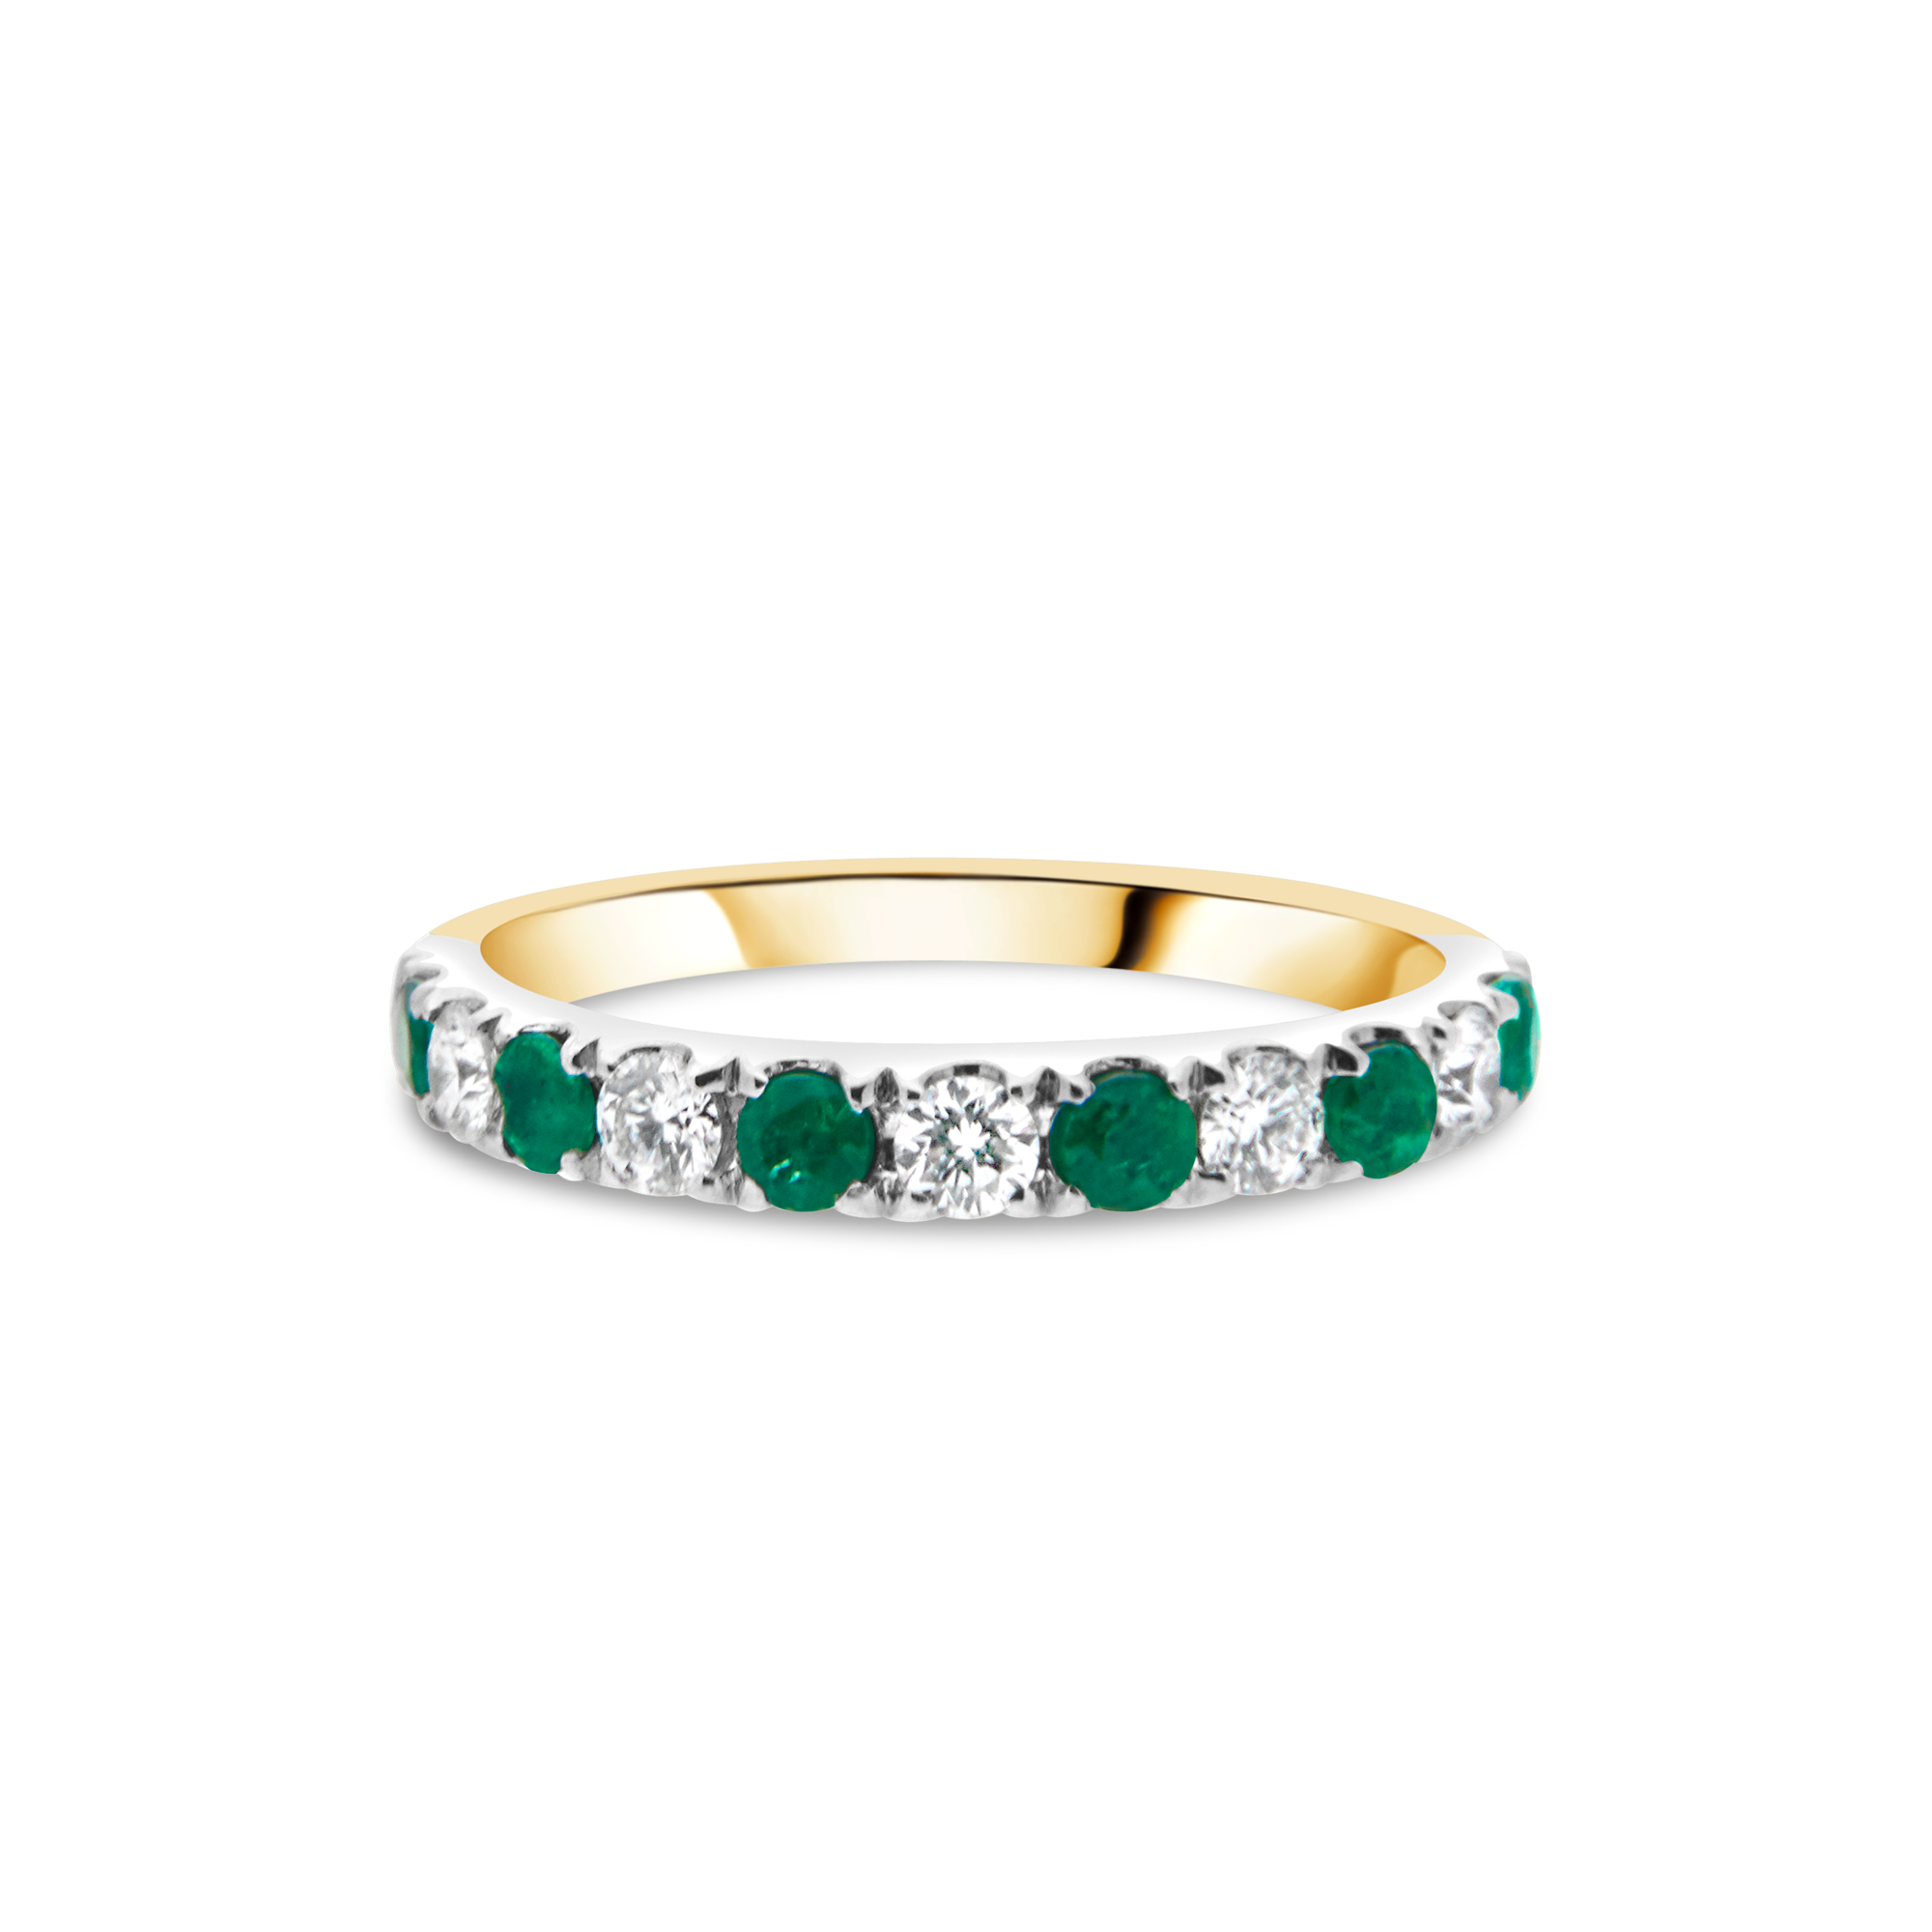 The "Galeria" with Emerald and Diamond, Yellow Gold